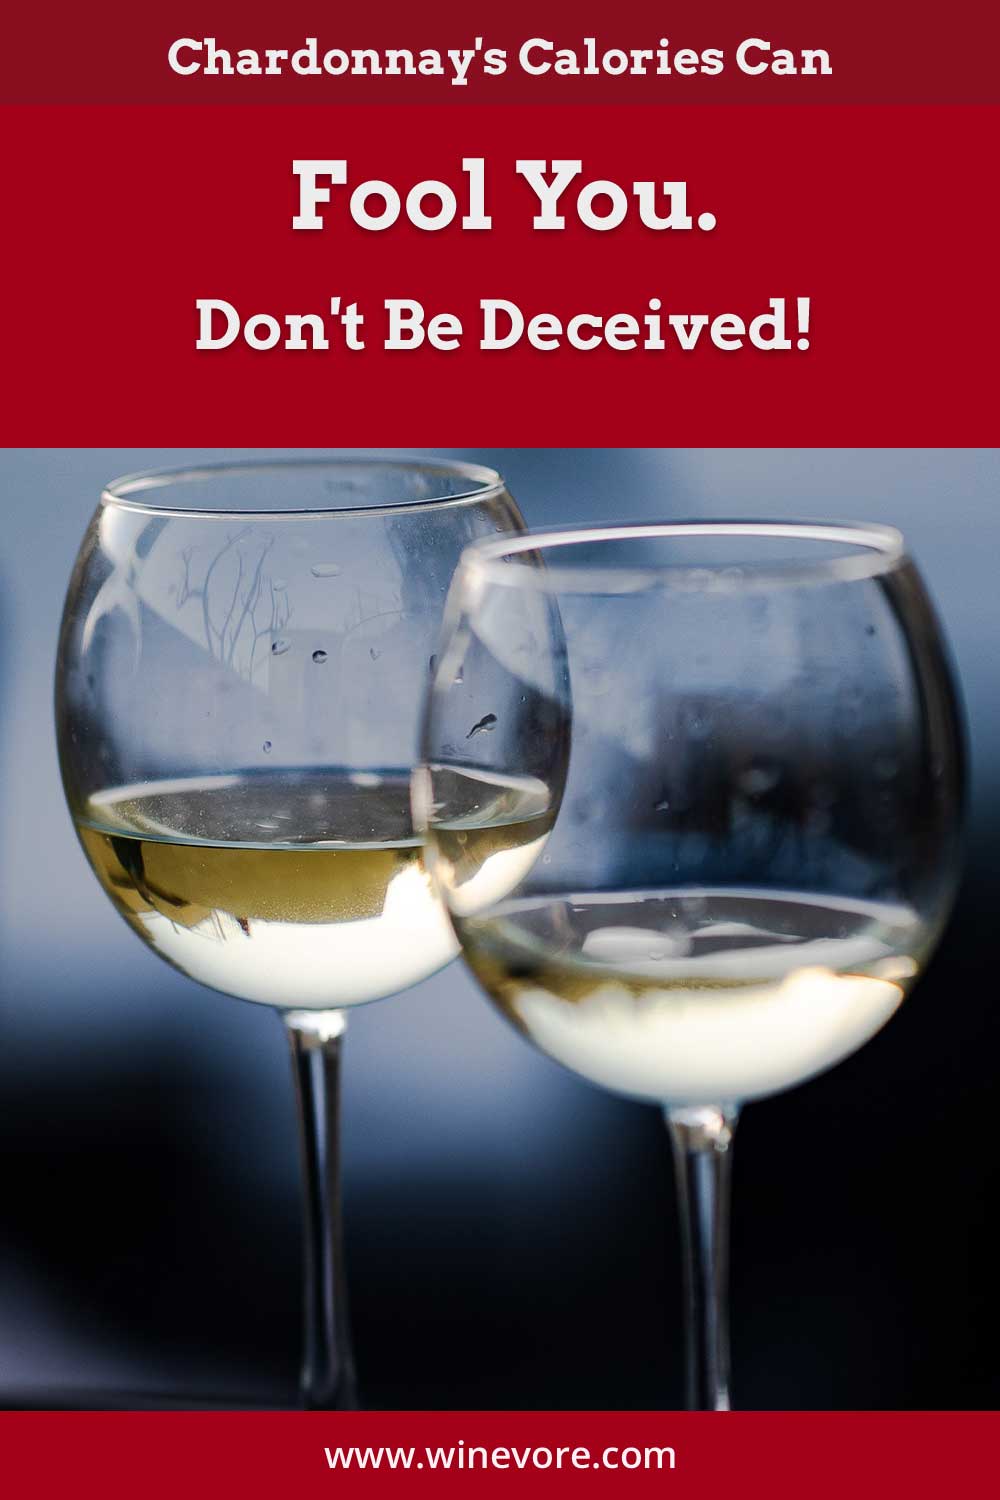 2 glasses of Chardonnay - Its Calories Can Fool You. Don't Be Deceived!